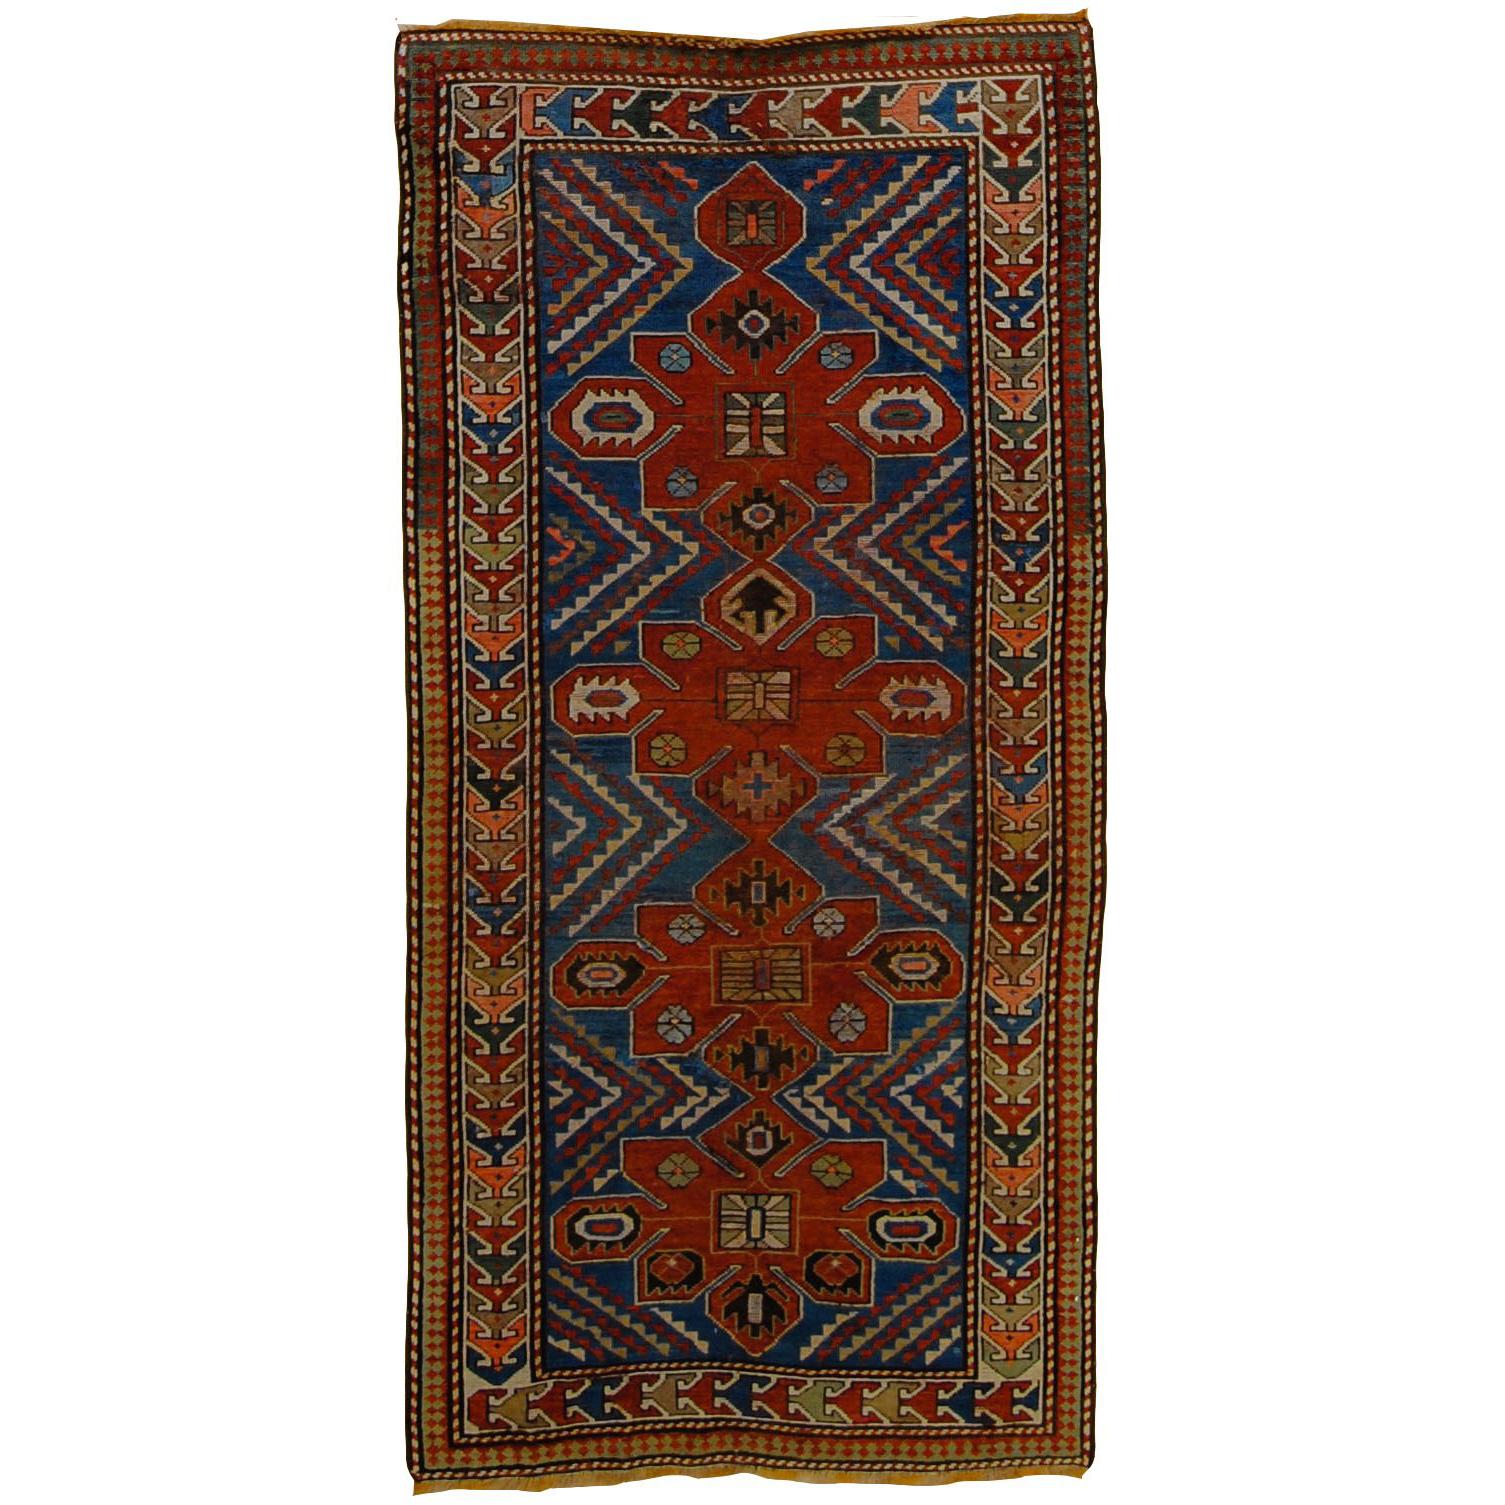 Early 20th Century Blu and Red Natural Wool Caucasian Medallion Kazak Rug